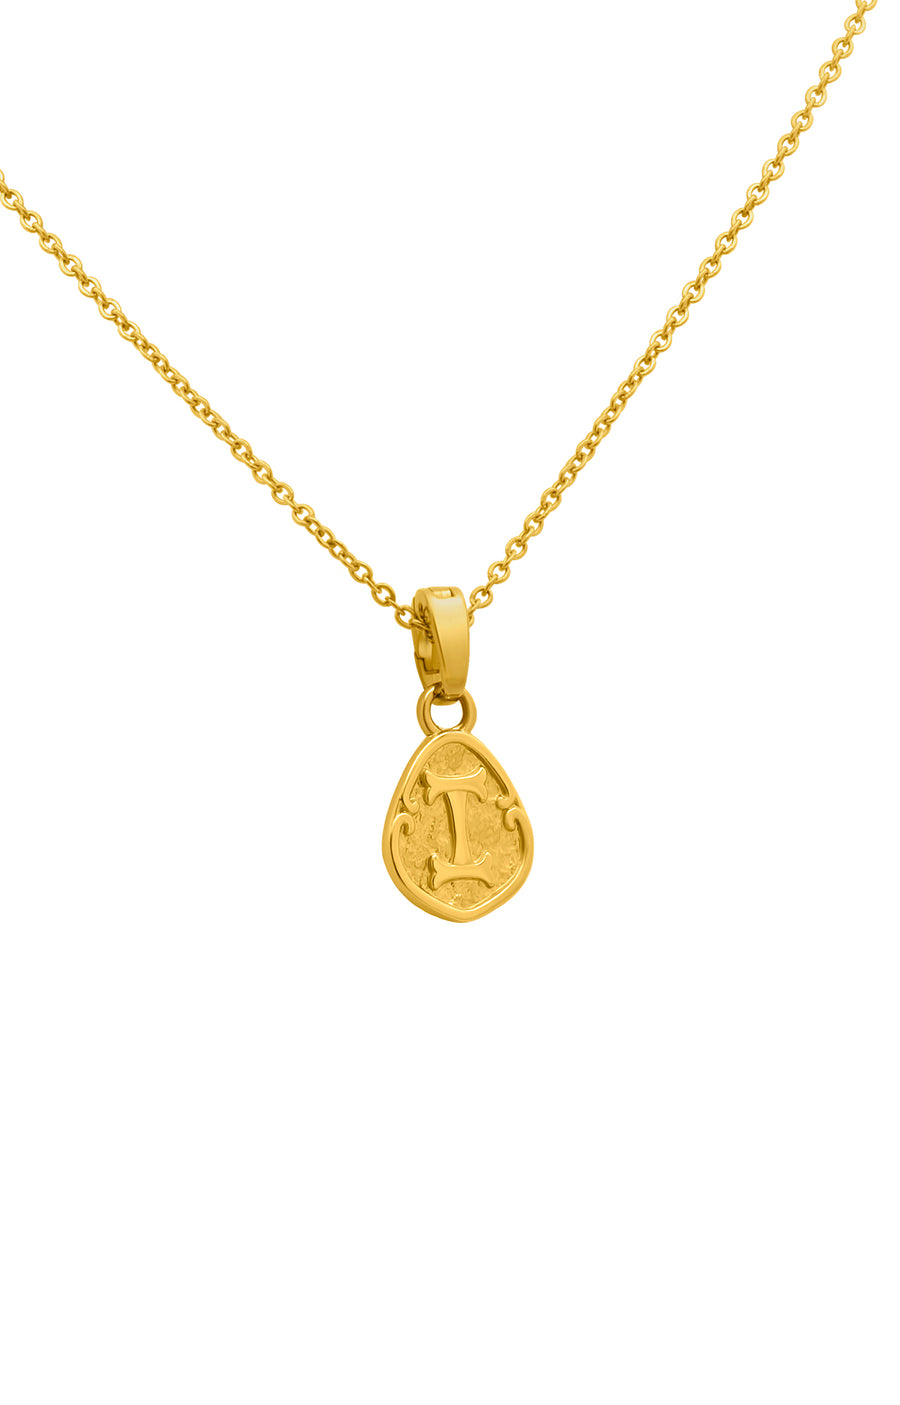 "I" Tberfil Letter Pendant with Petite Adjustable Chain Necklace